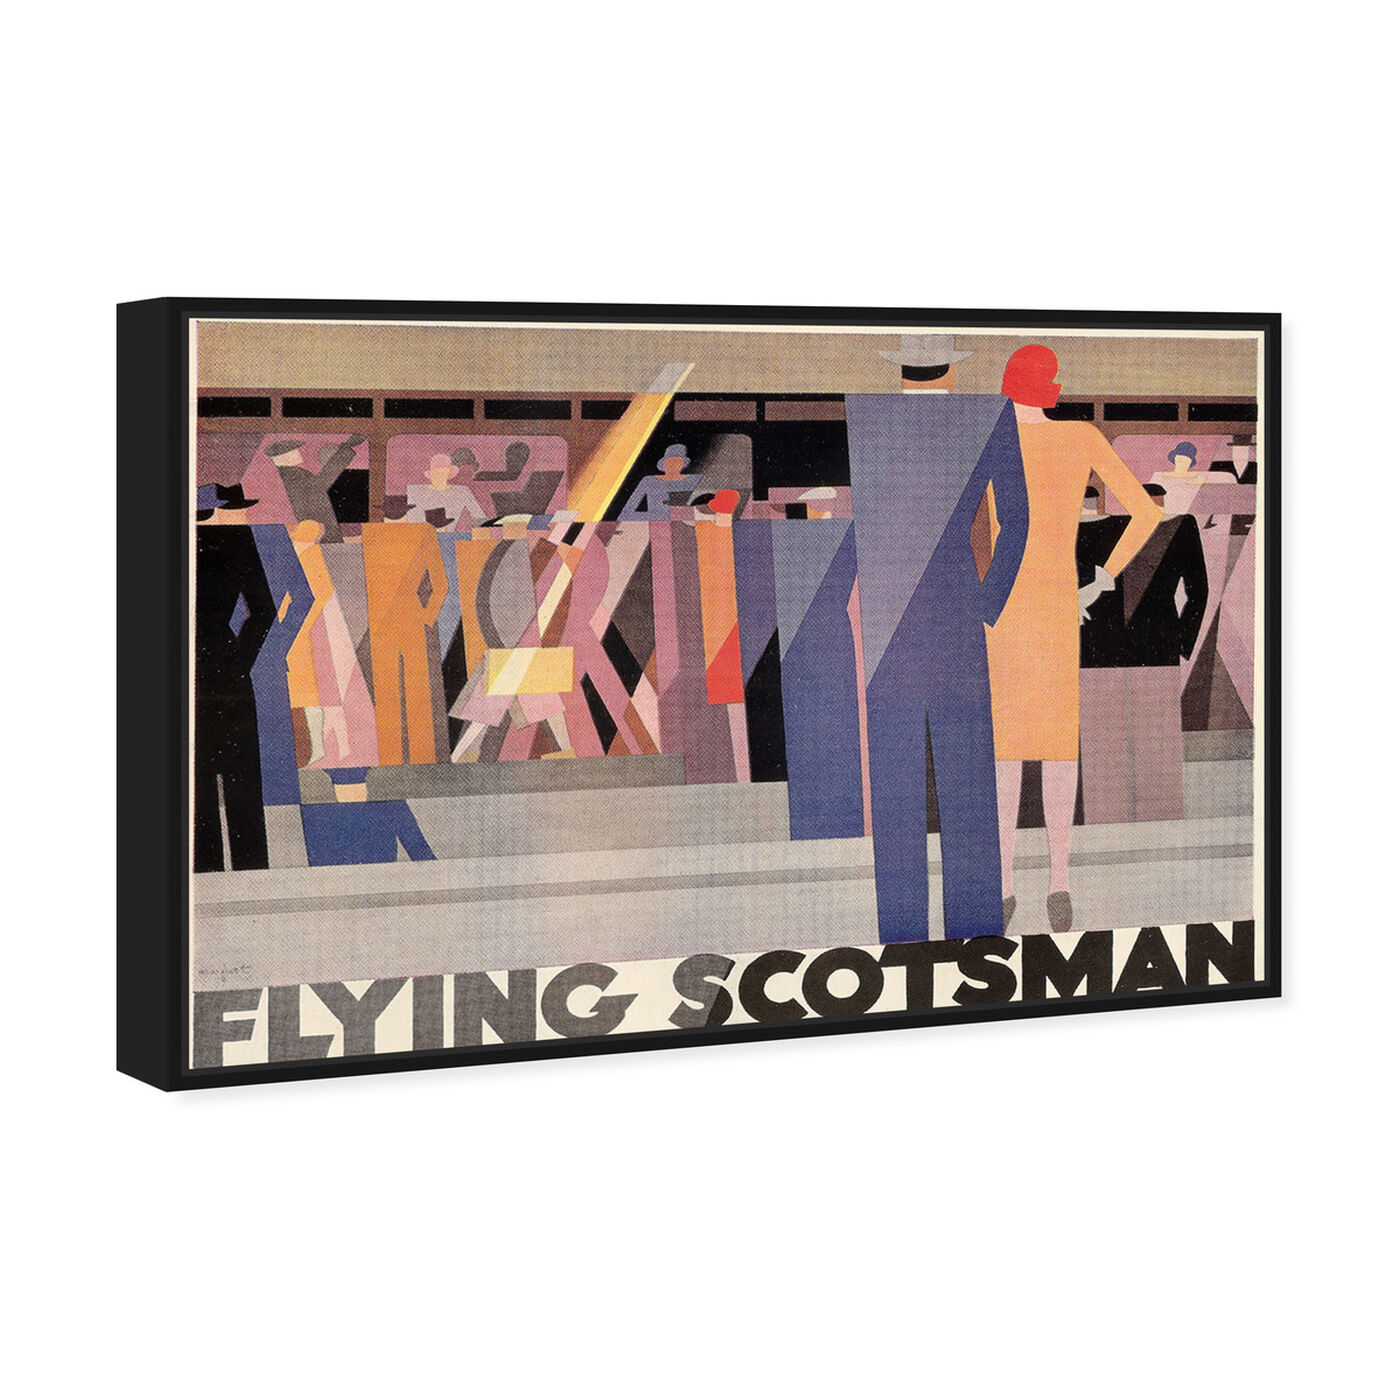 Angled view of Flying Scotsman featuring advertising and posters art.